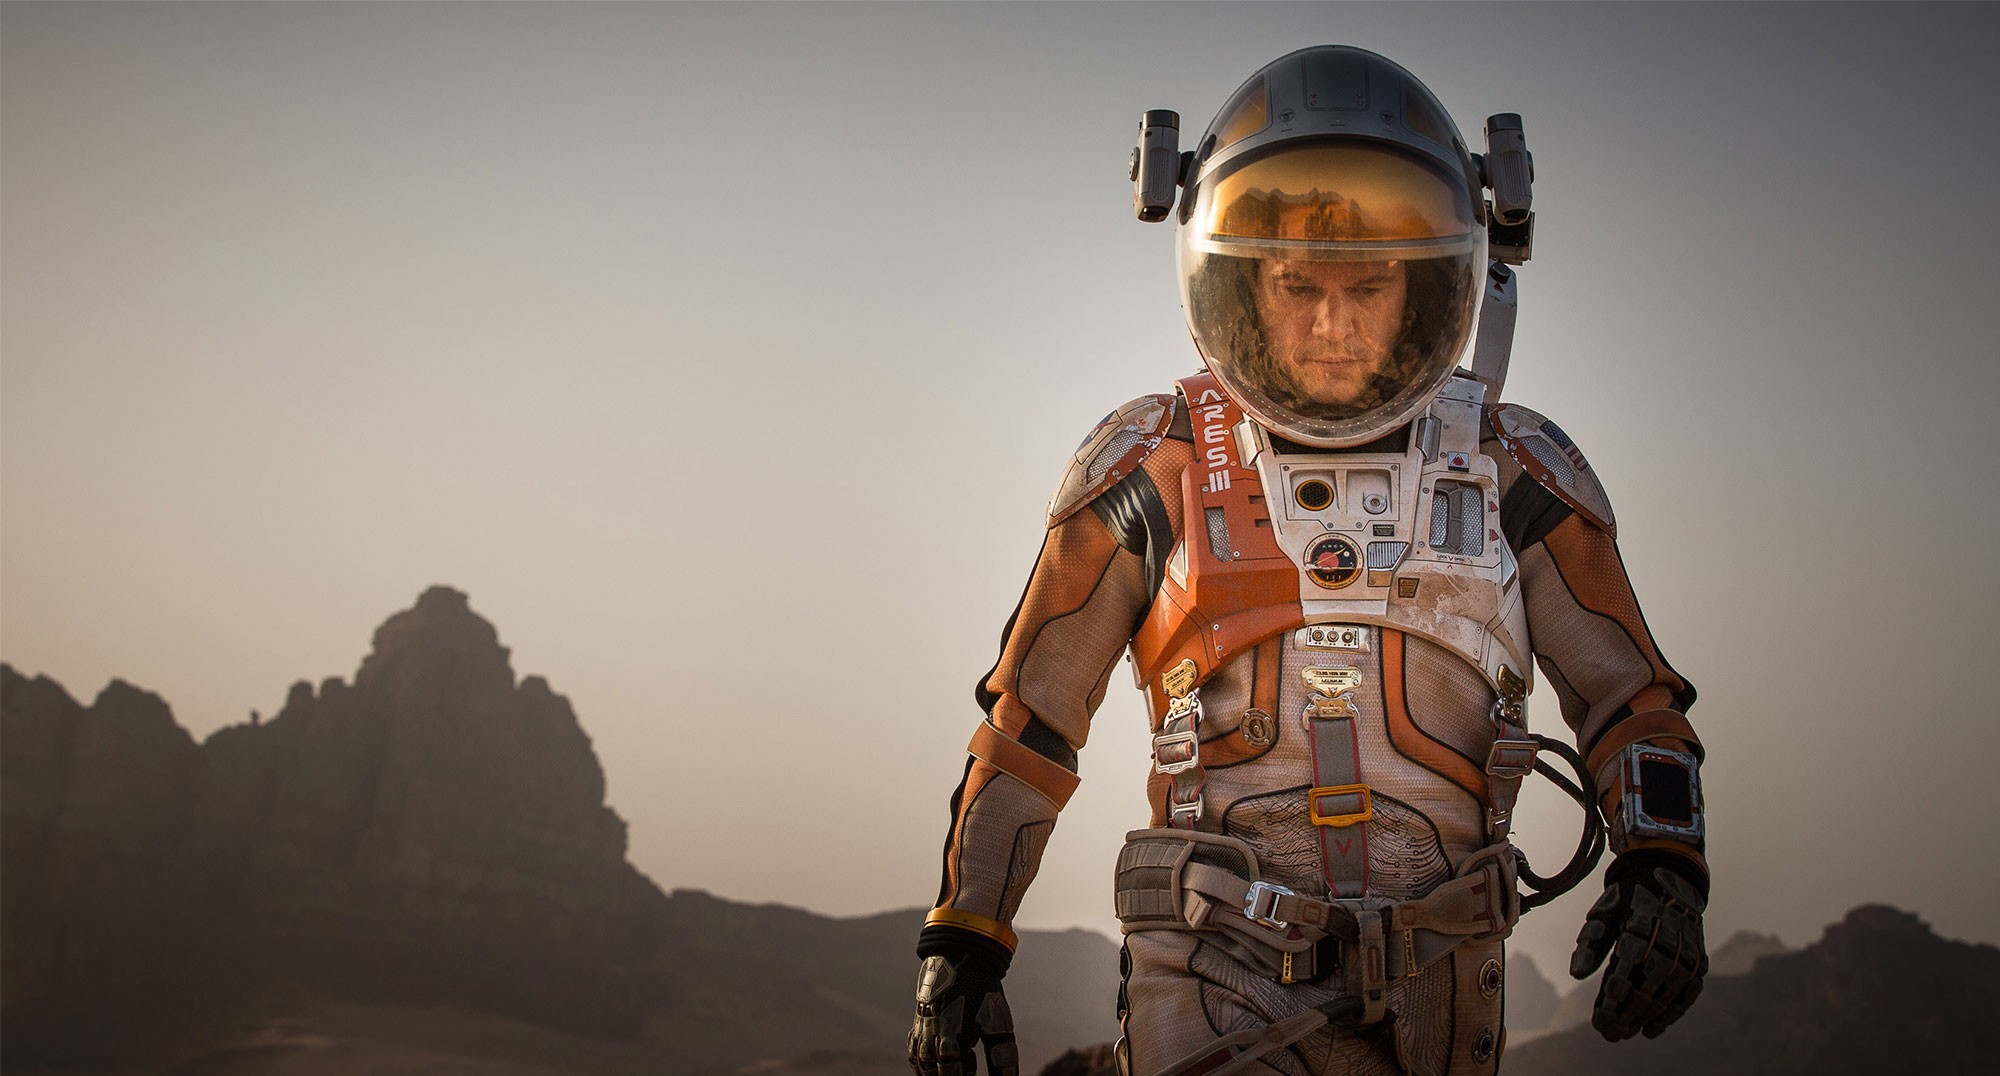 Still from the movie, The Martian